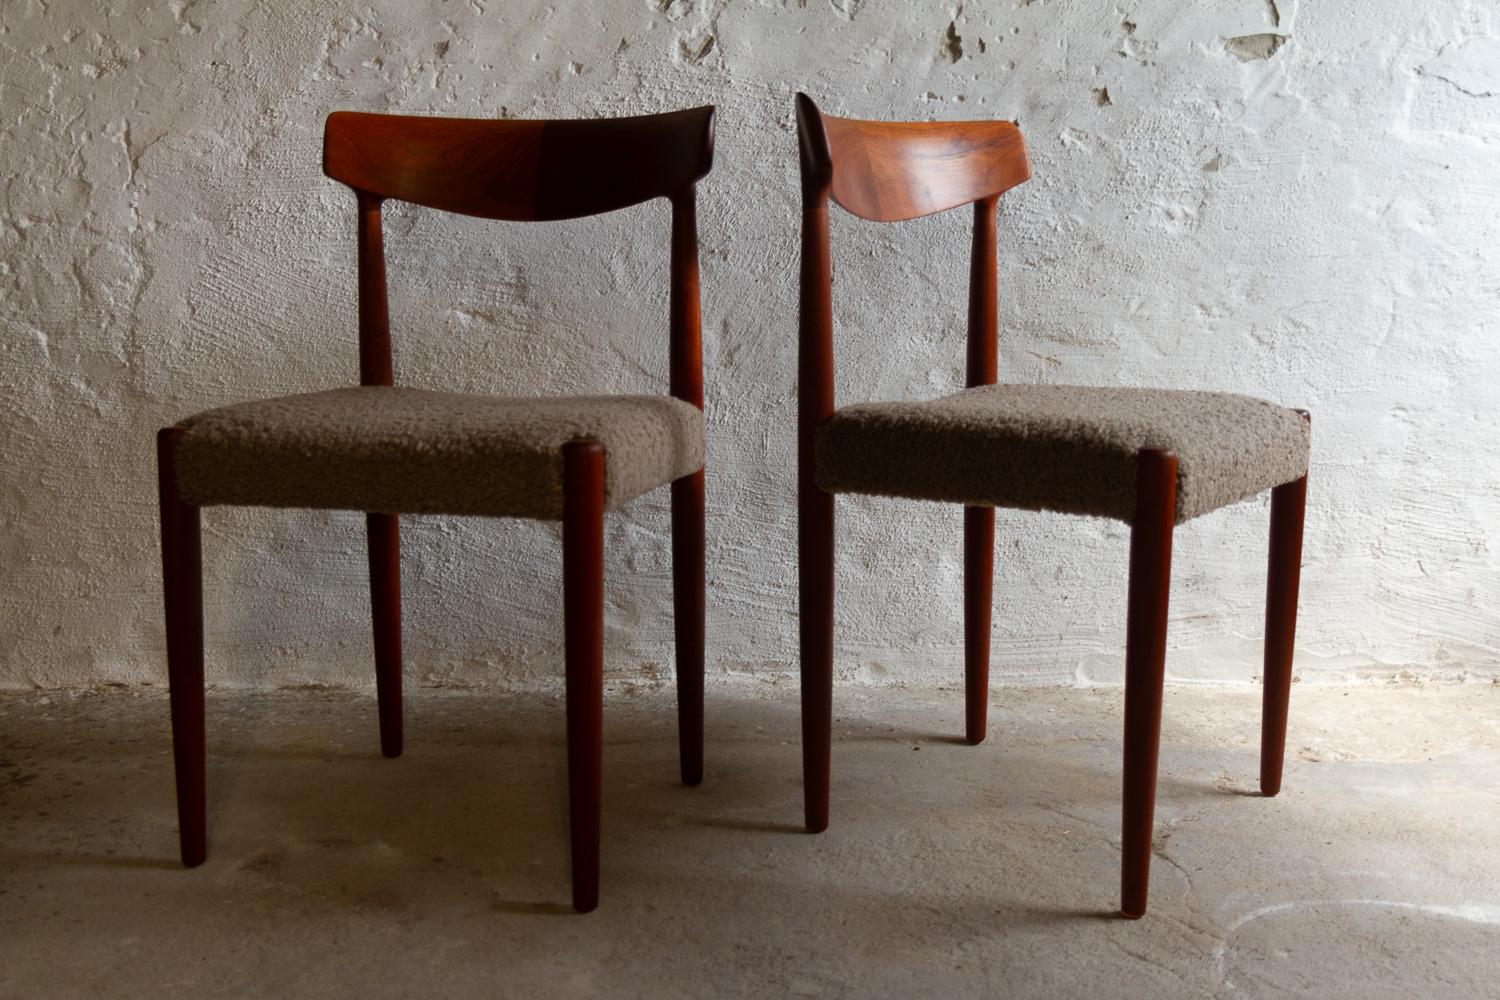 Danish Modern Teak Dining Chairs by Knud Færch for Slagelse, 1960s. Set of 6. For Sale 12